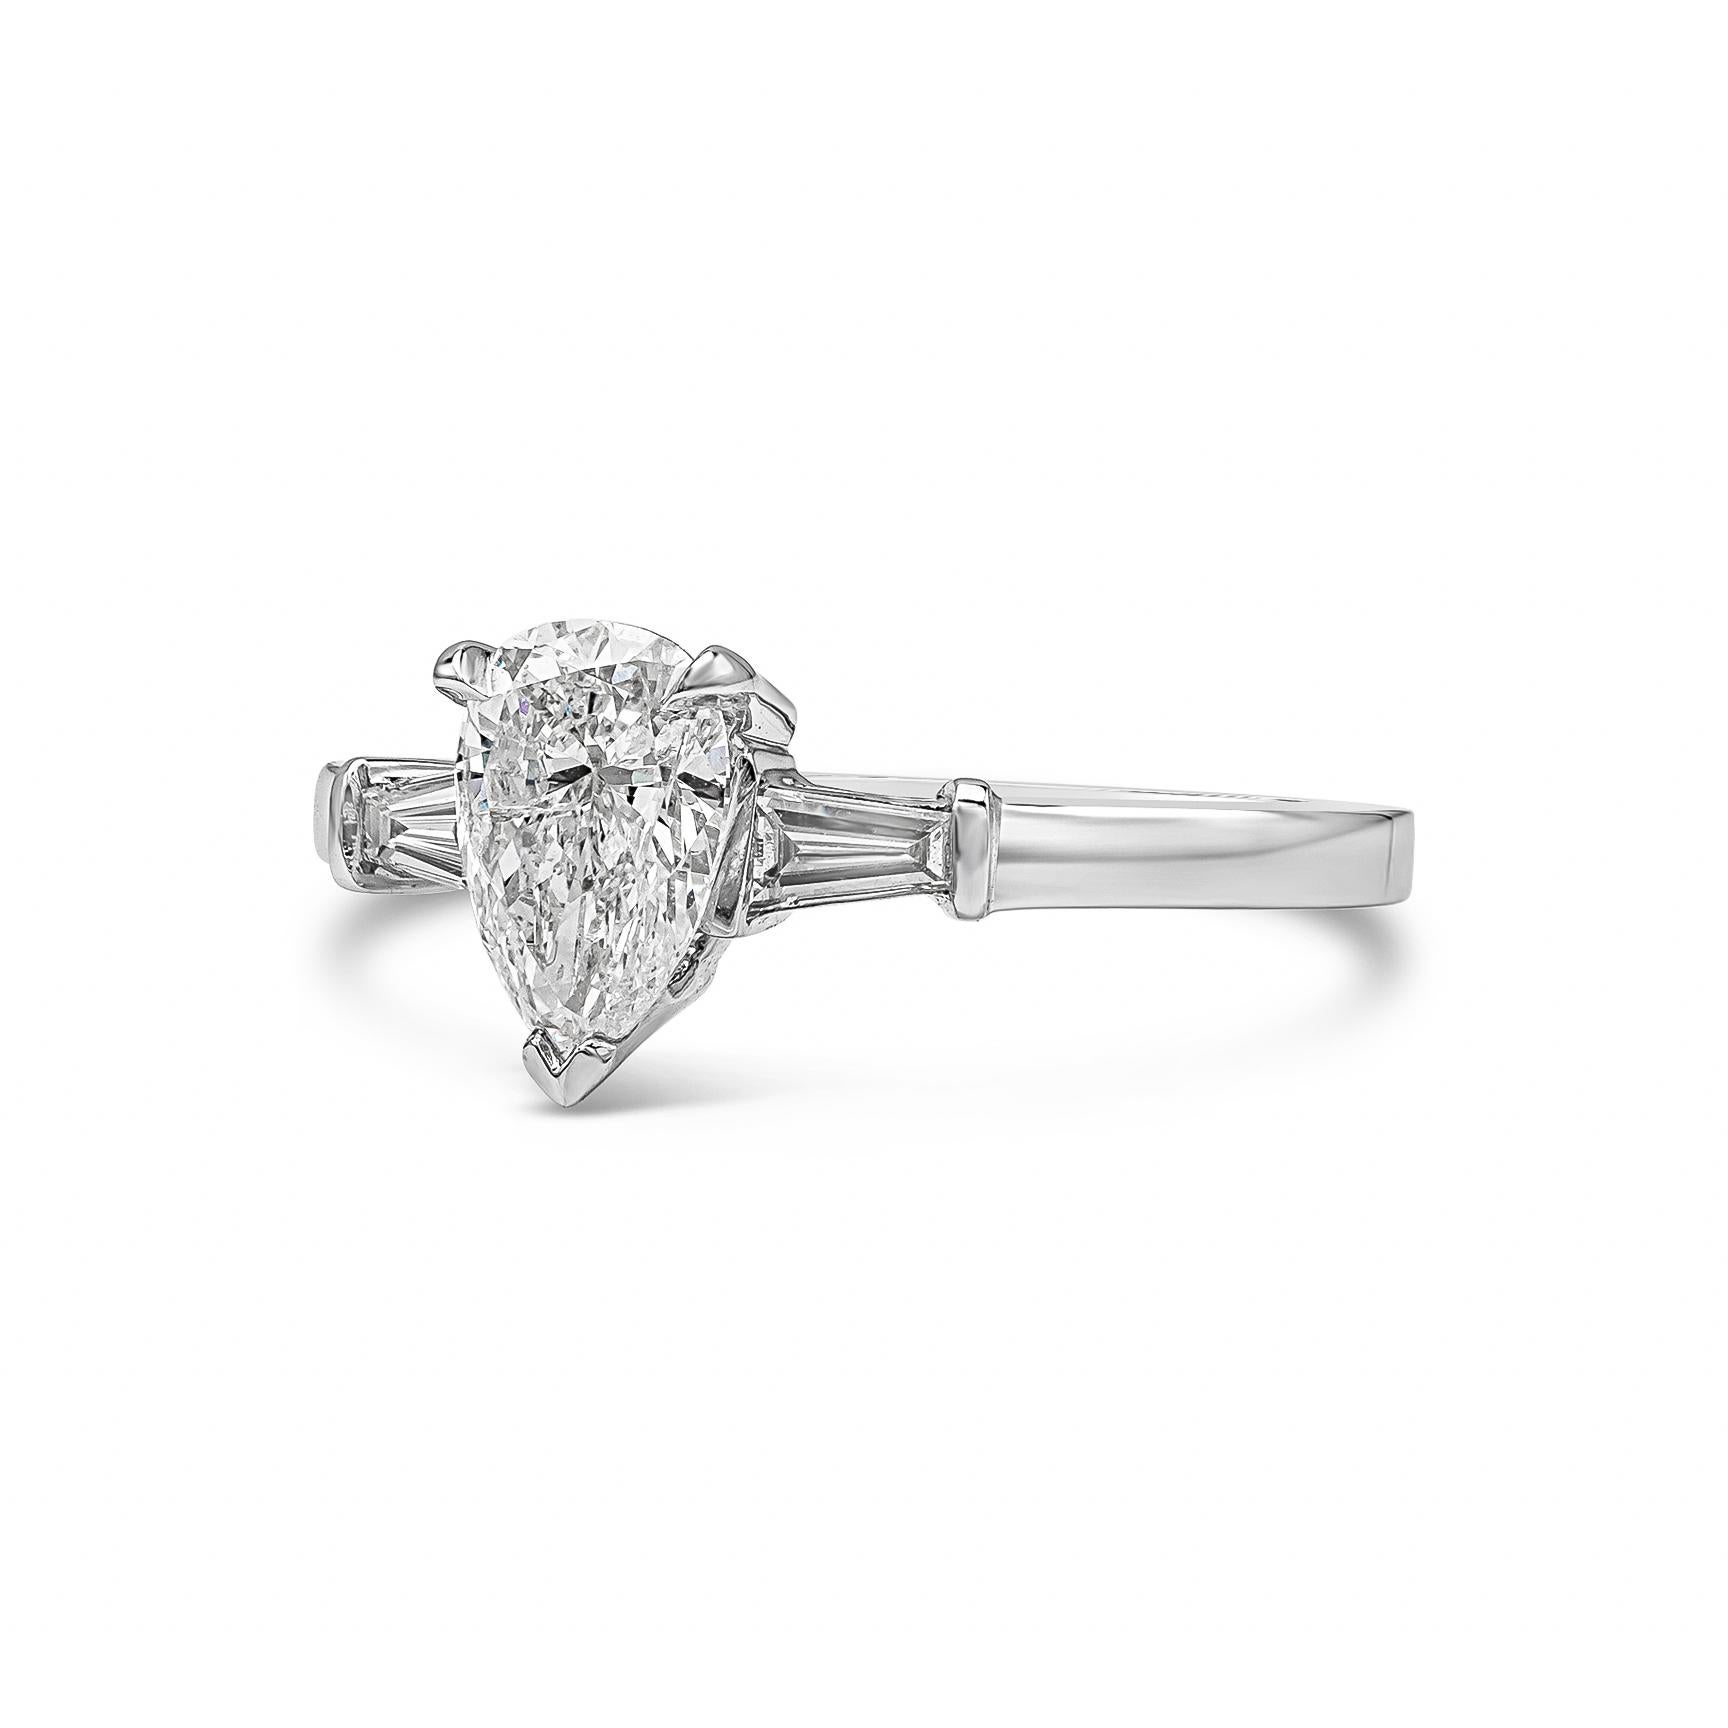 A timeless three stone engagement ring style, showcasing a 1.01 carats pear shape diamond, flanked by two tapered baguette cut diamonds weighing 0.18 carats total. Set on 18K white gold. Size 6.5 US, adjustable upon request.

Roman Malakov is a